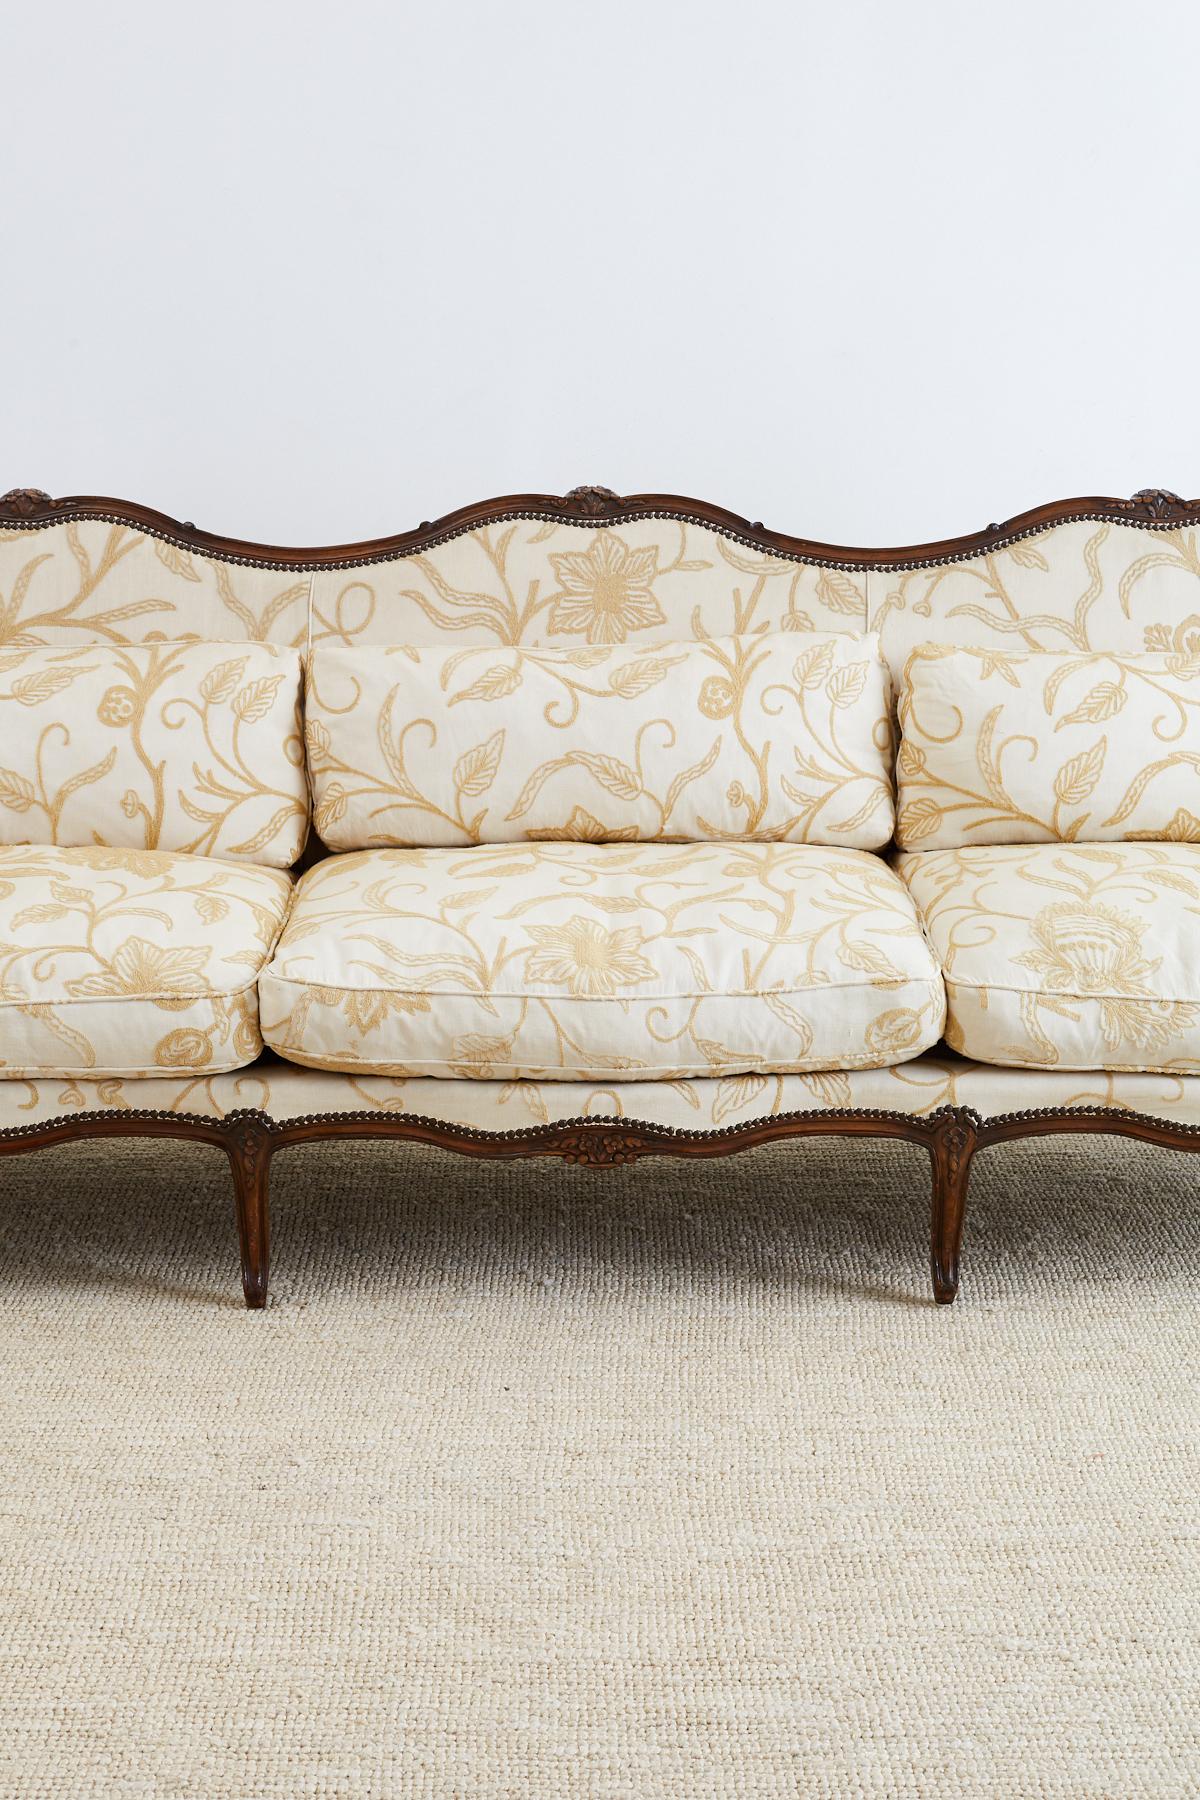 Grand French wingback sofa or canapé a oreilles made in the Louis XV taste. Features a large triple back hand carved walnut frame having a serpentine crest and seat. Restored and upholstered in the late 20th century with an impressive wool